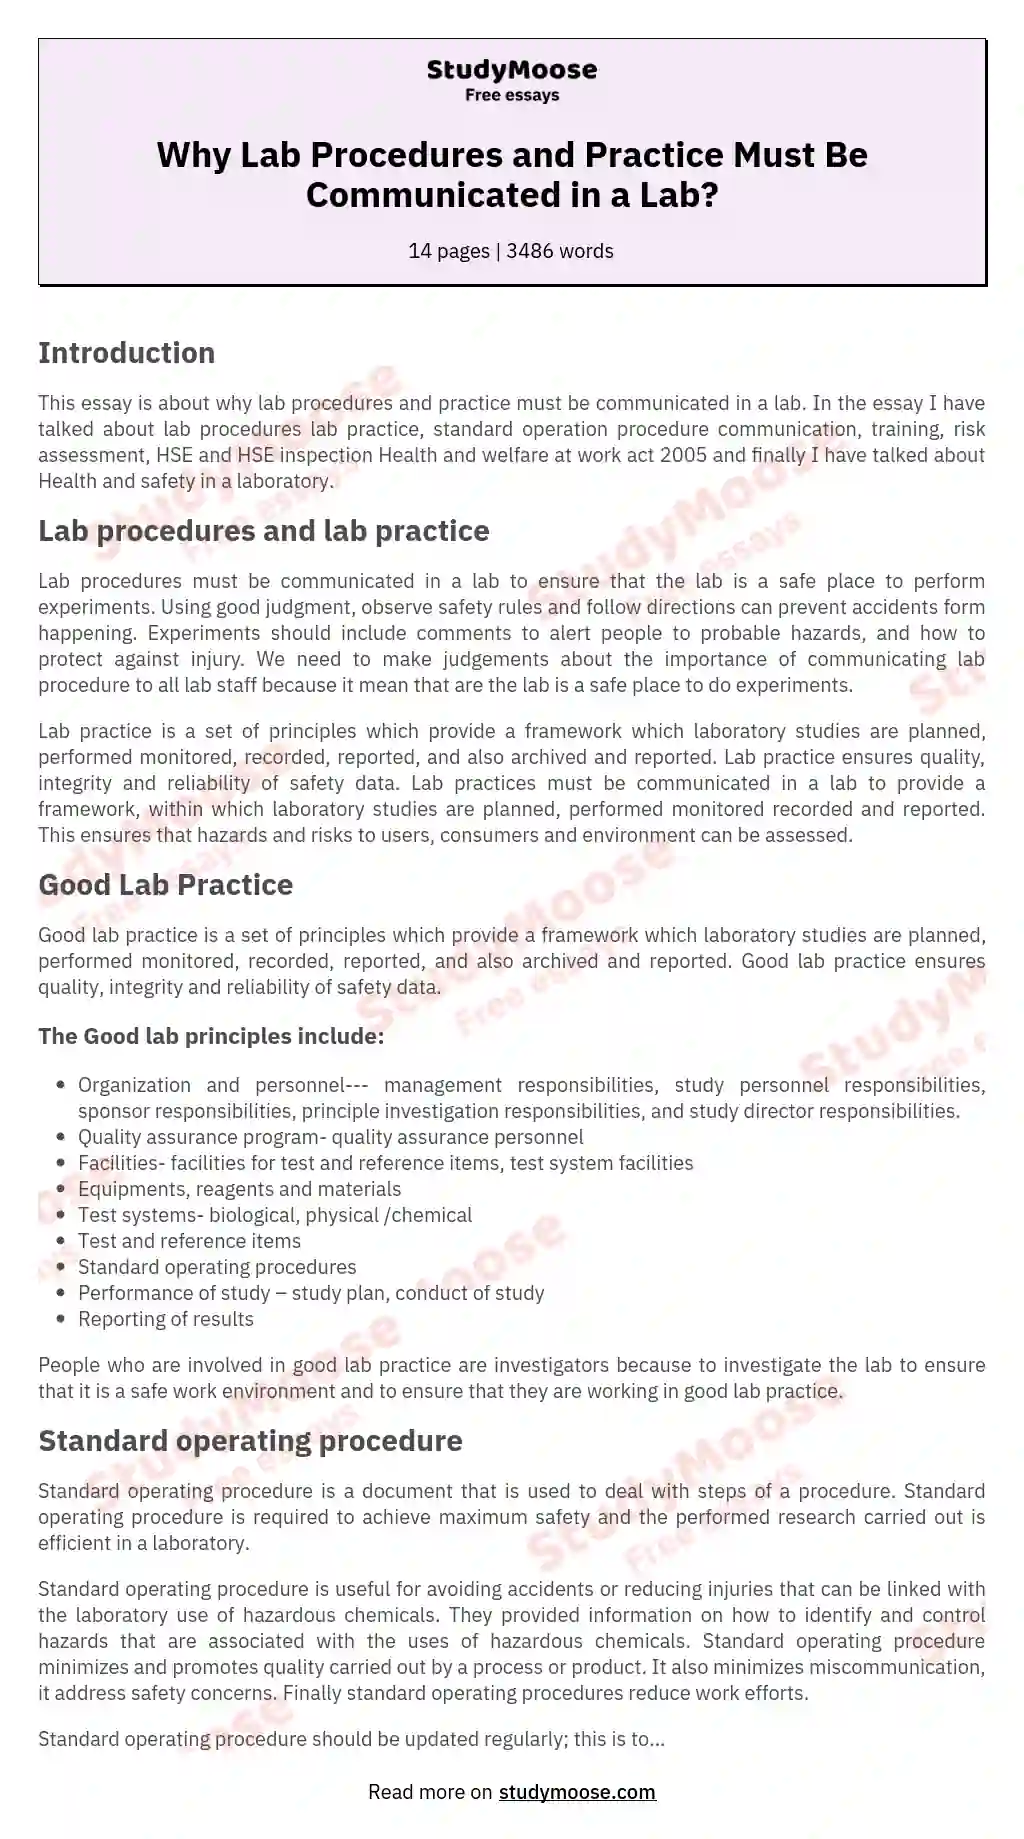 Why Lab Procedures and Practice Must Be Communicated in a Lab? essay